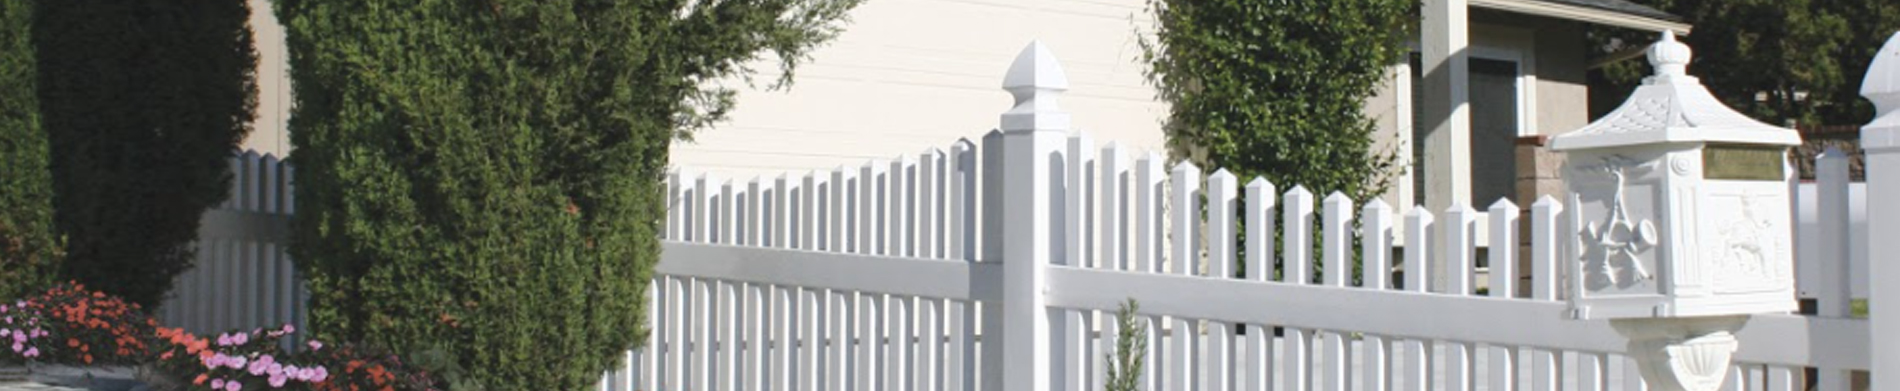 Are our vinyl fences worth investing in? Hear what Duramax says